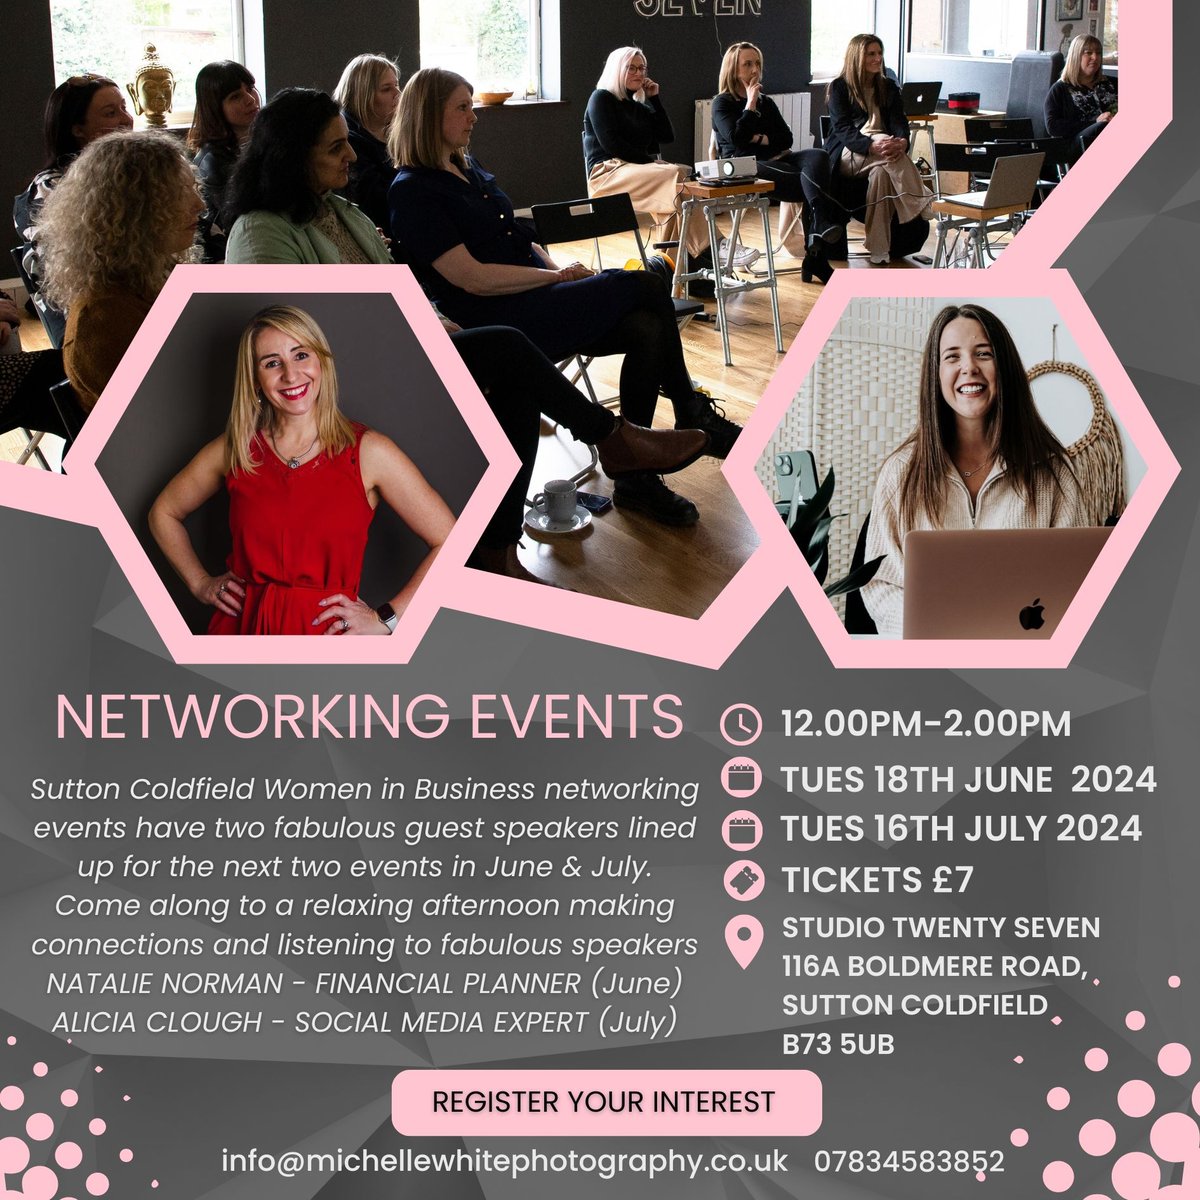 Only a few tickets left for our next networking events in June & July. Who wants to last few tickets? 🙌 To book email me at Info@michellewhitephotography.co.uk #networking #suttoncoldfieldsmallbusinesses #birminghambusinessowners